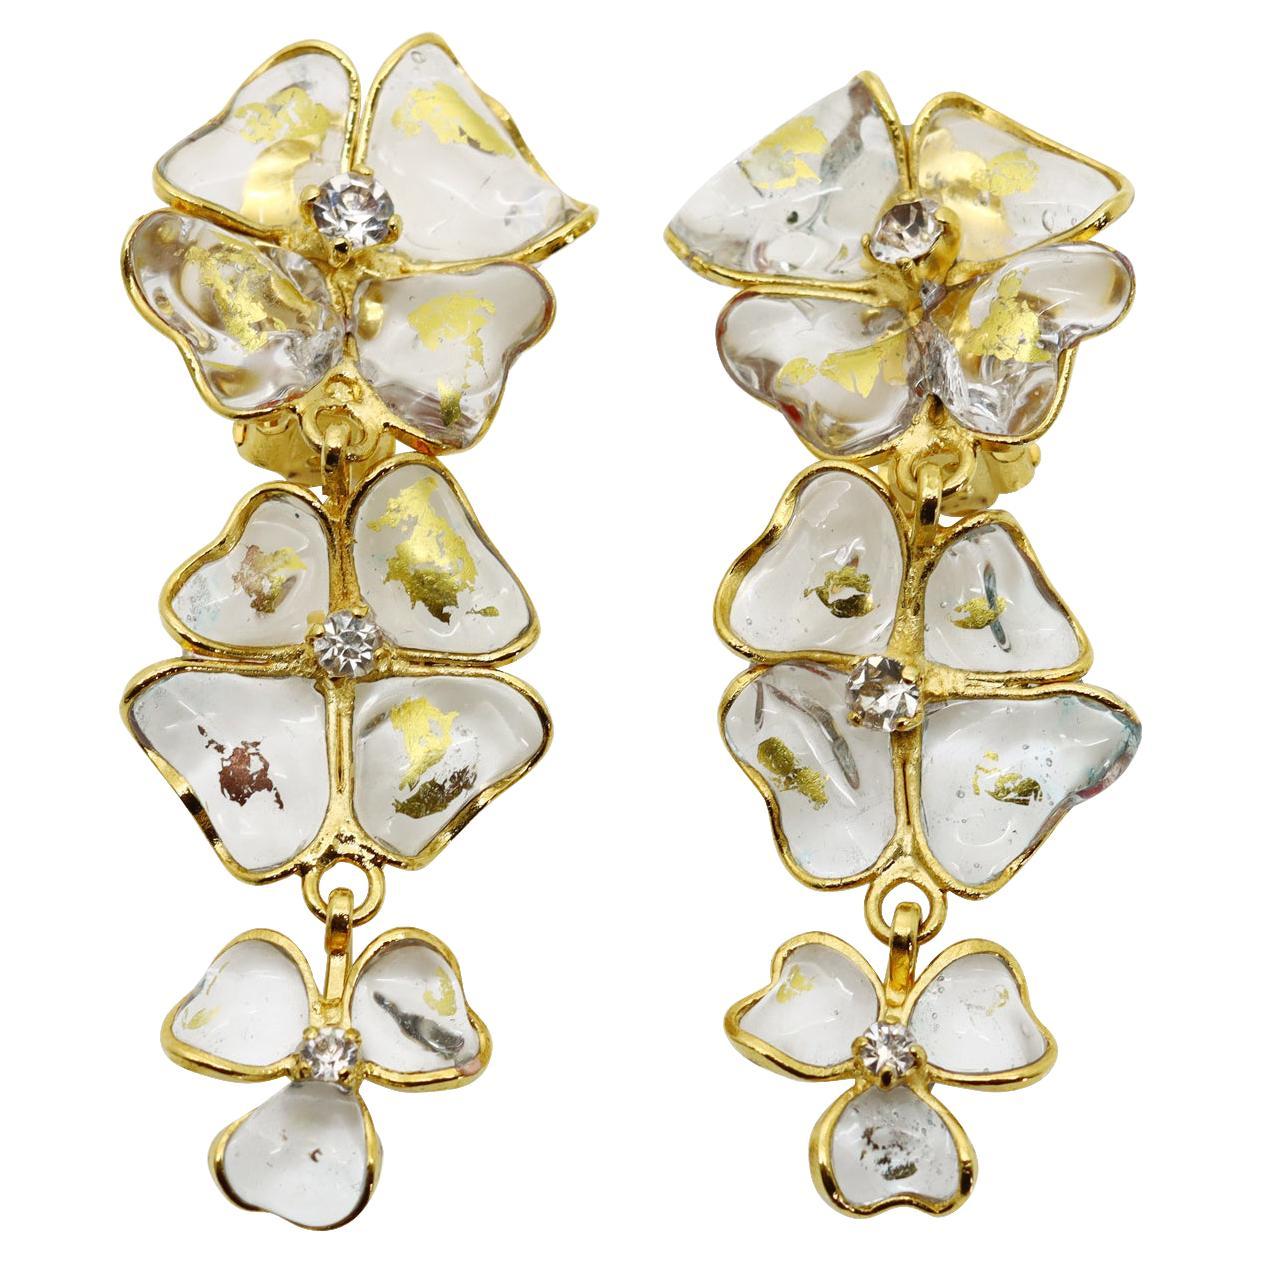 Vintage Gripoix Translucent Earrings with Pieces of Gold